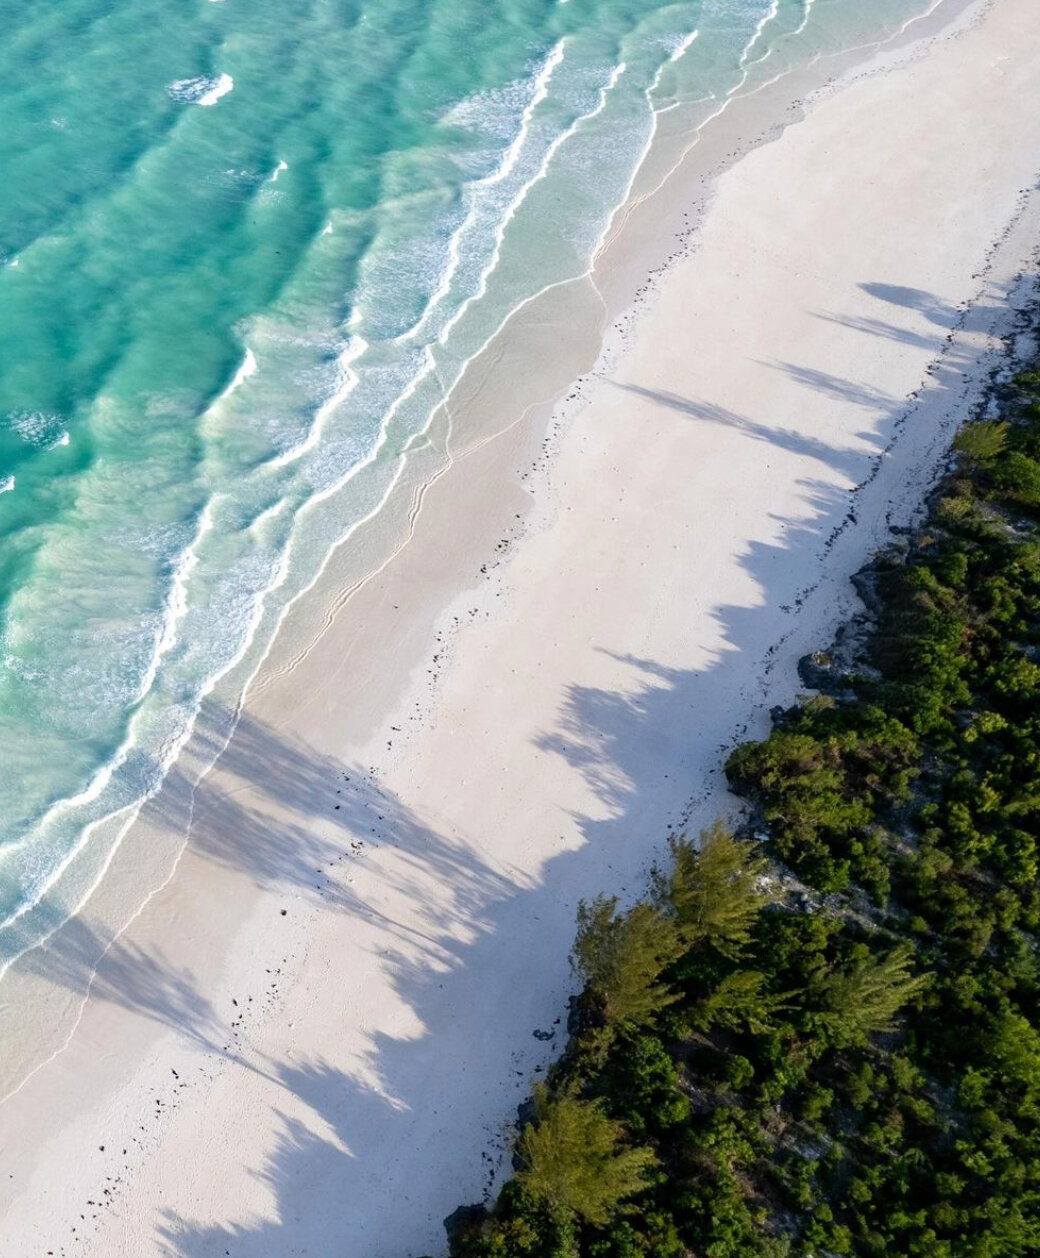 Make Zanzibar's wild southern coast your home from home. With sun bleached sand and turquoise waters, you can live a life of wonder.​​​​​​​​
​​​​​​​​
Talk to us about owning a piece of paradise: contact sales@joharibeach.com today!